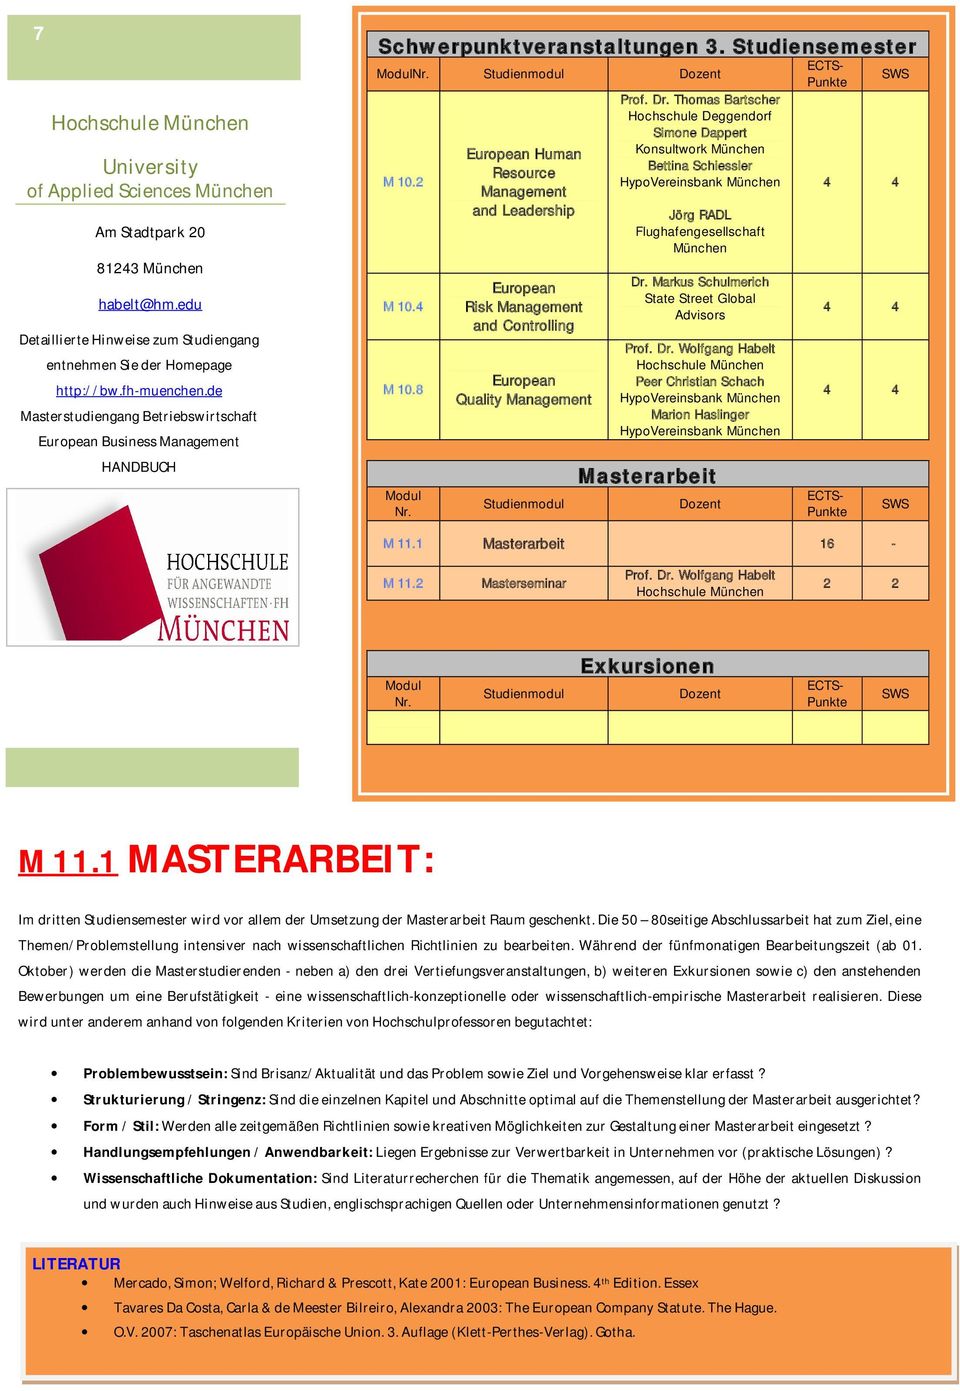 European Human Resource Management and Leadership European Risk Management and Controlling European Quality Management Studienmodul Prof. Dr.